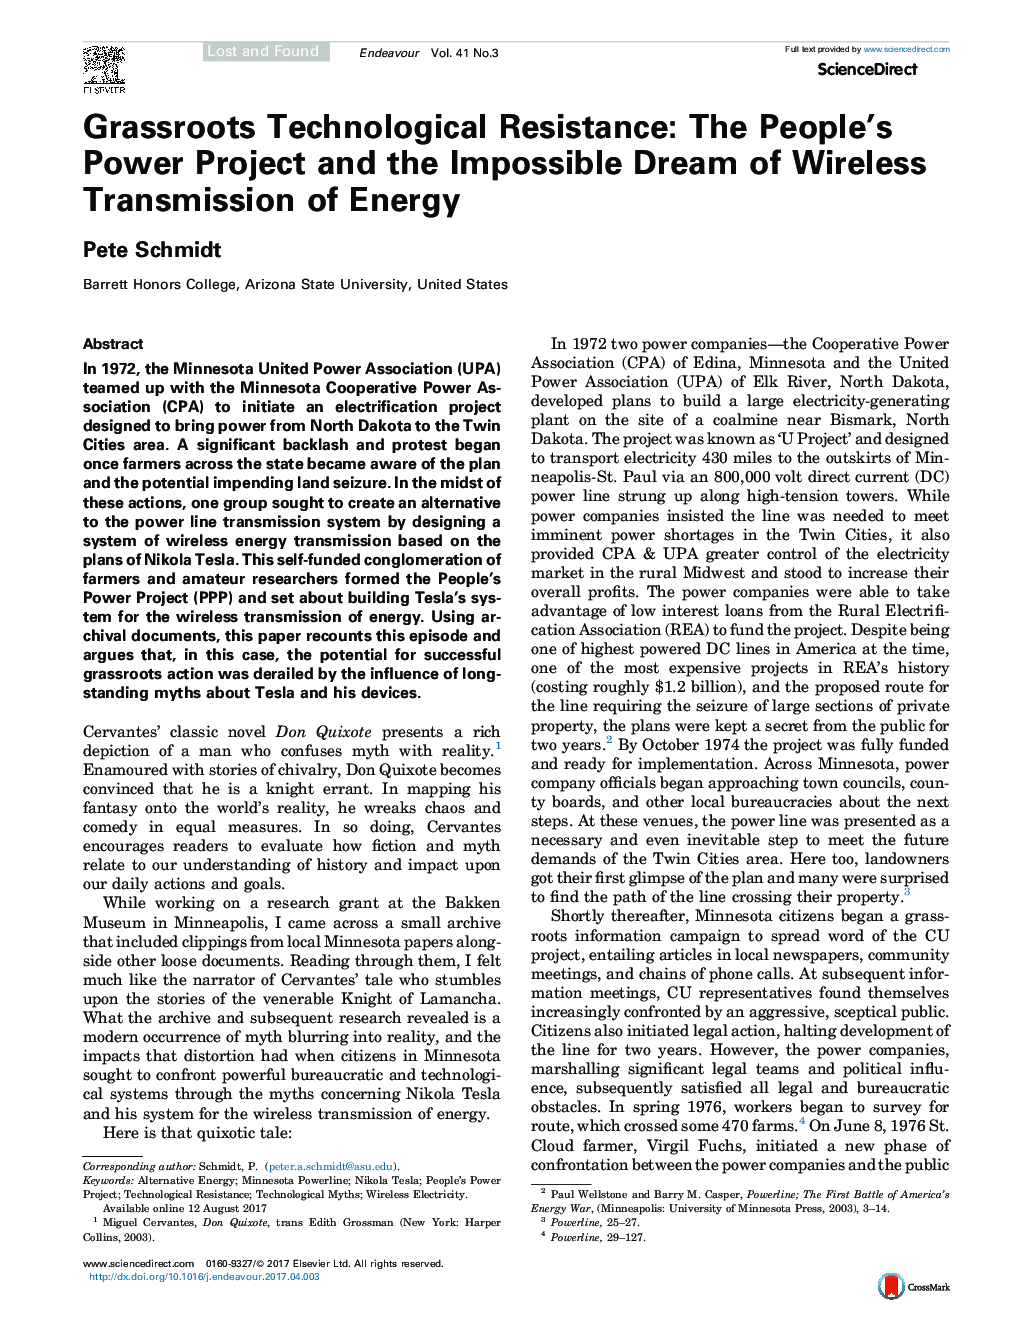 Grassroots Technological Resistance: The People's Power Project and the Impossible Dream of Wireless Transmission of Energy